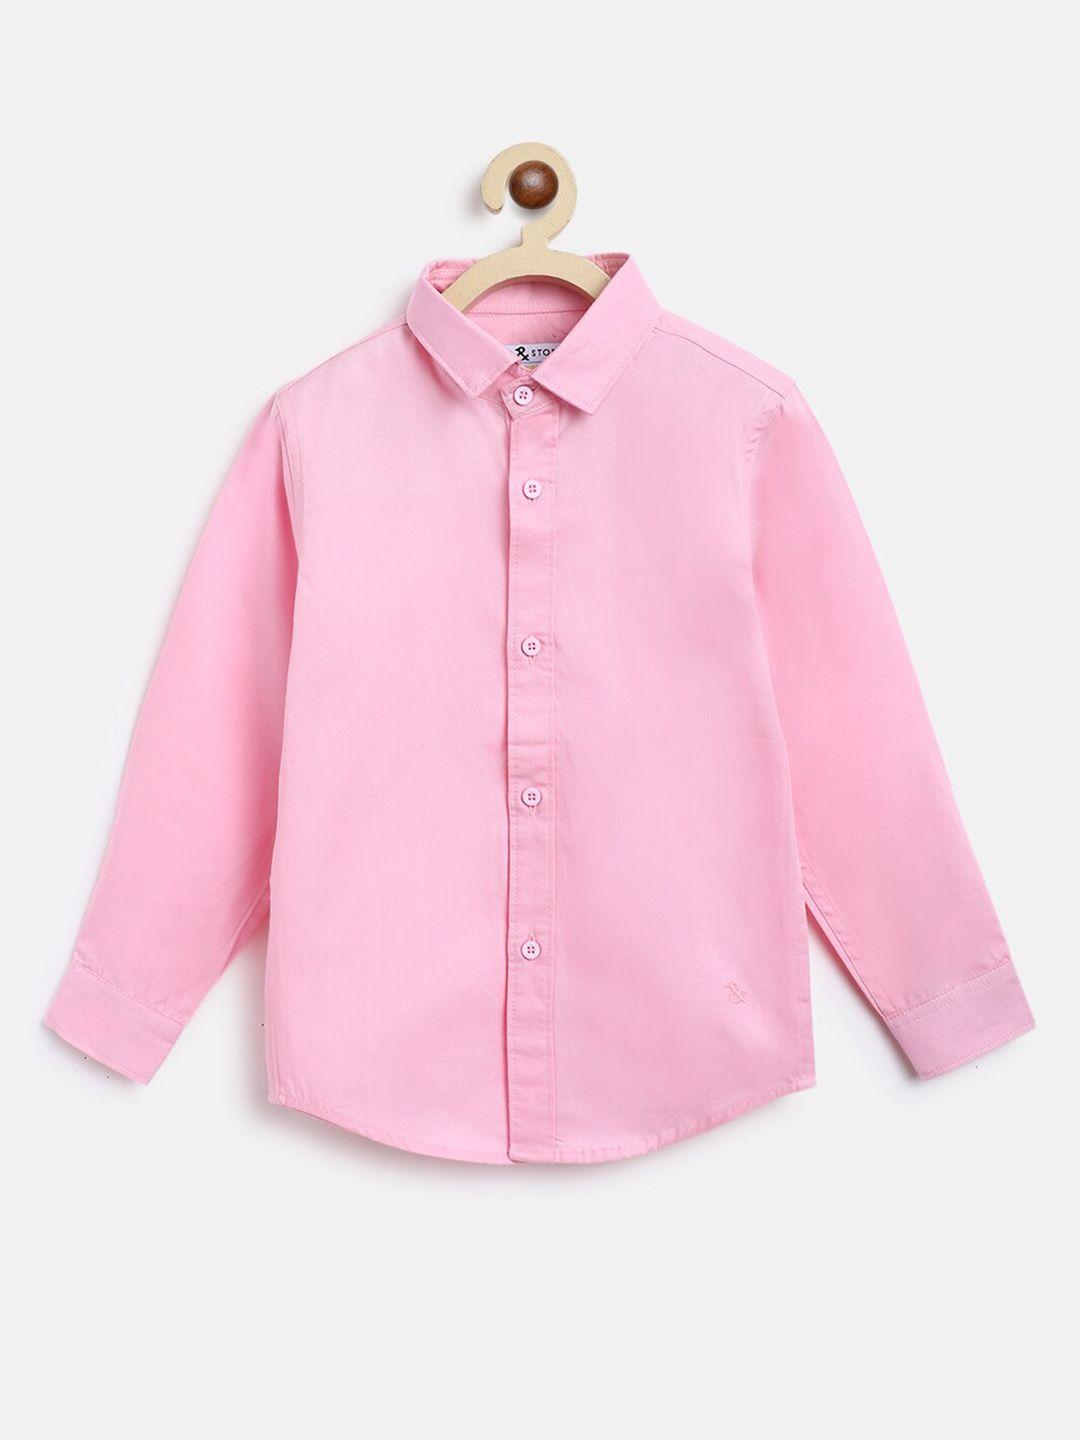 tales & stories boys pink solid casual spread collar shirt